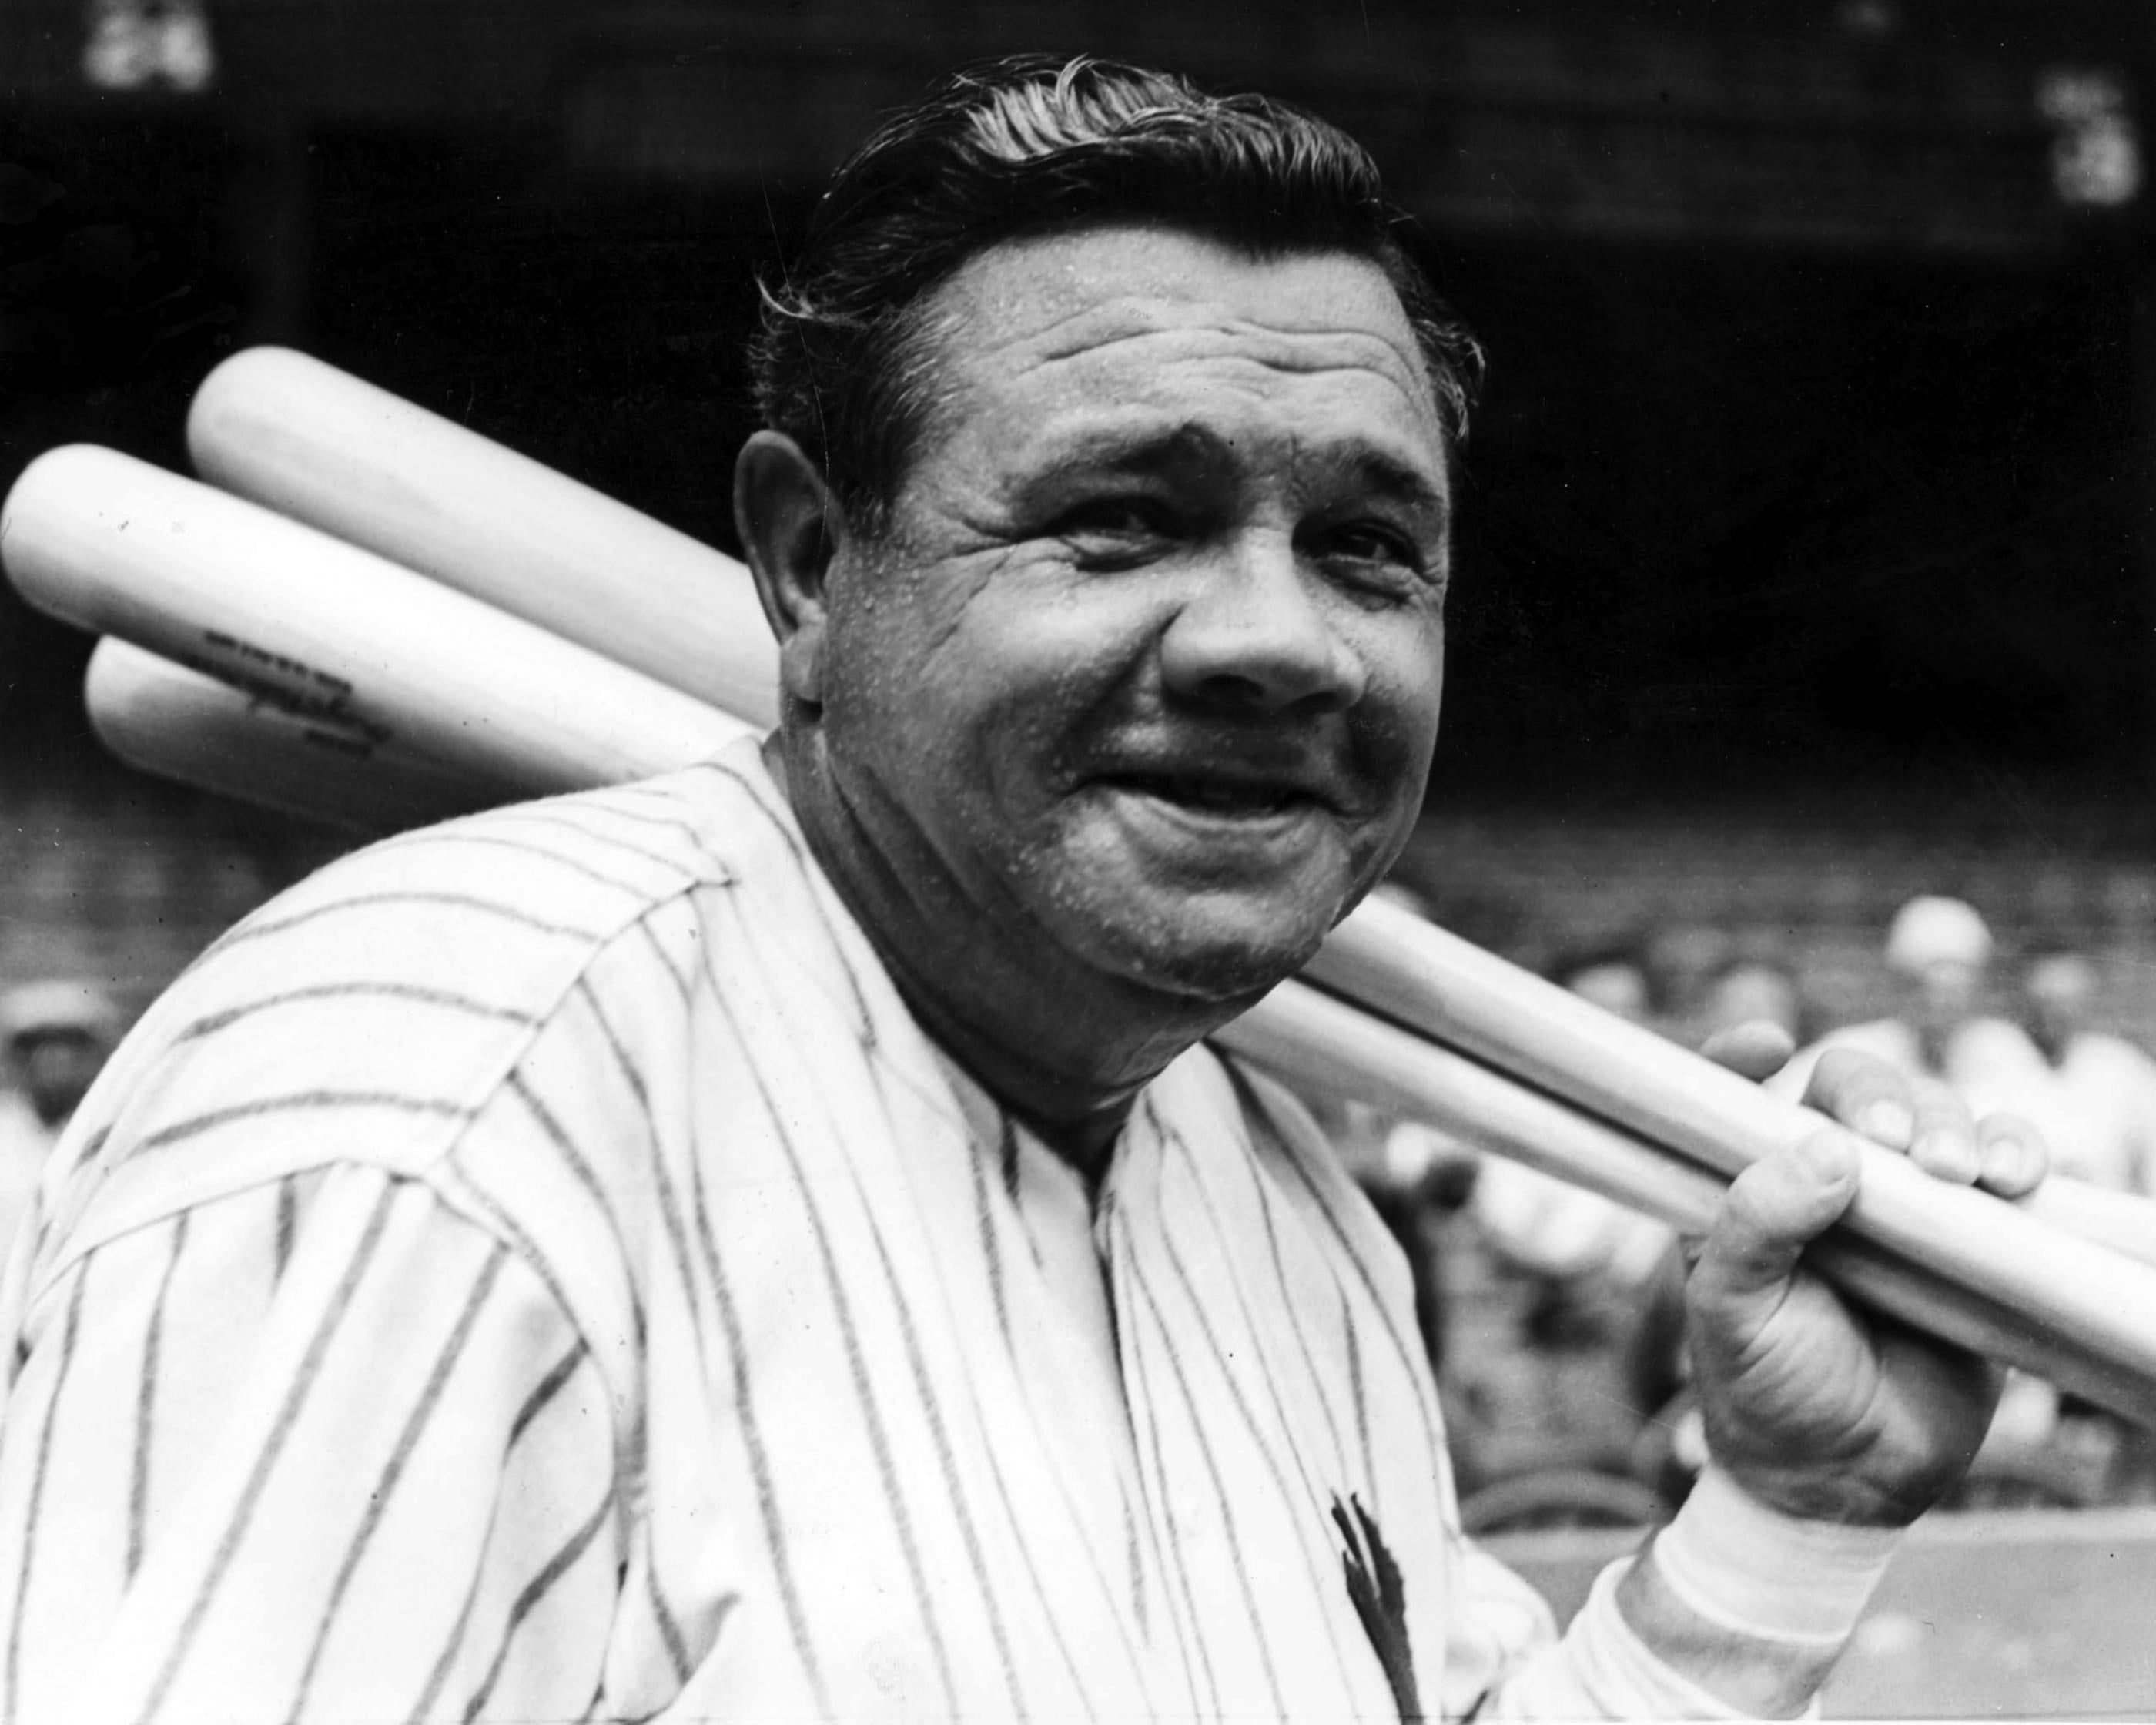 In what year did Babe Ruth hit a record 60 home runs?